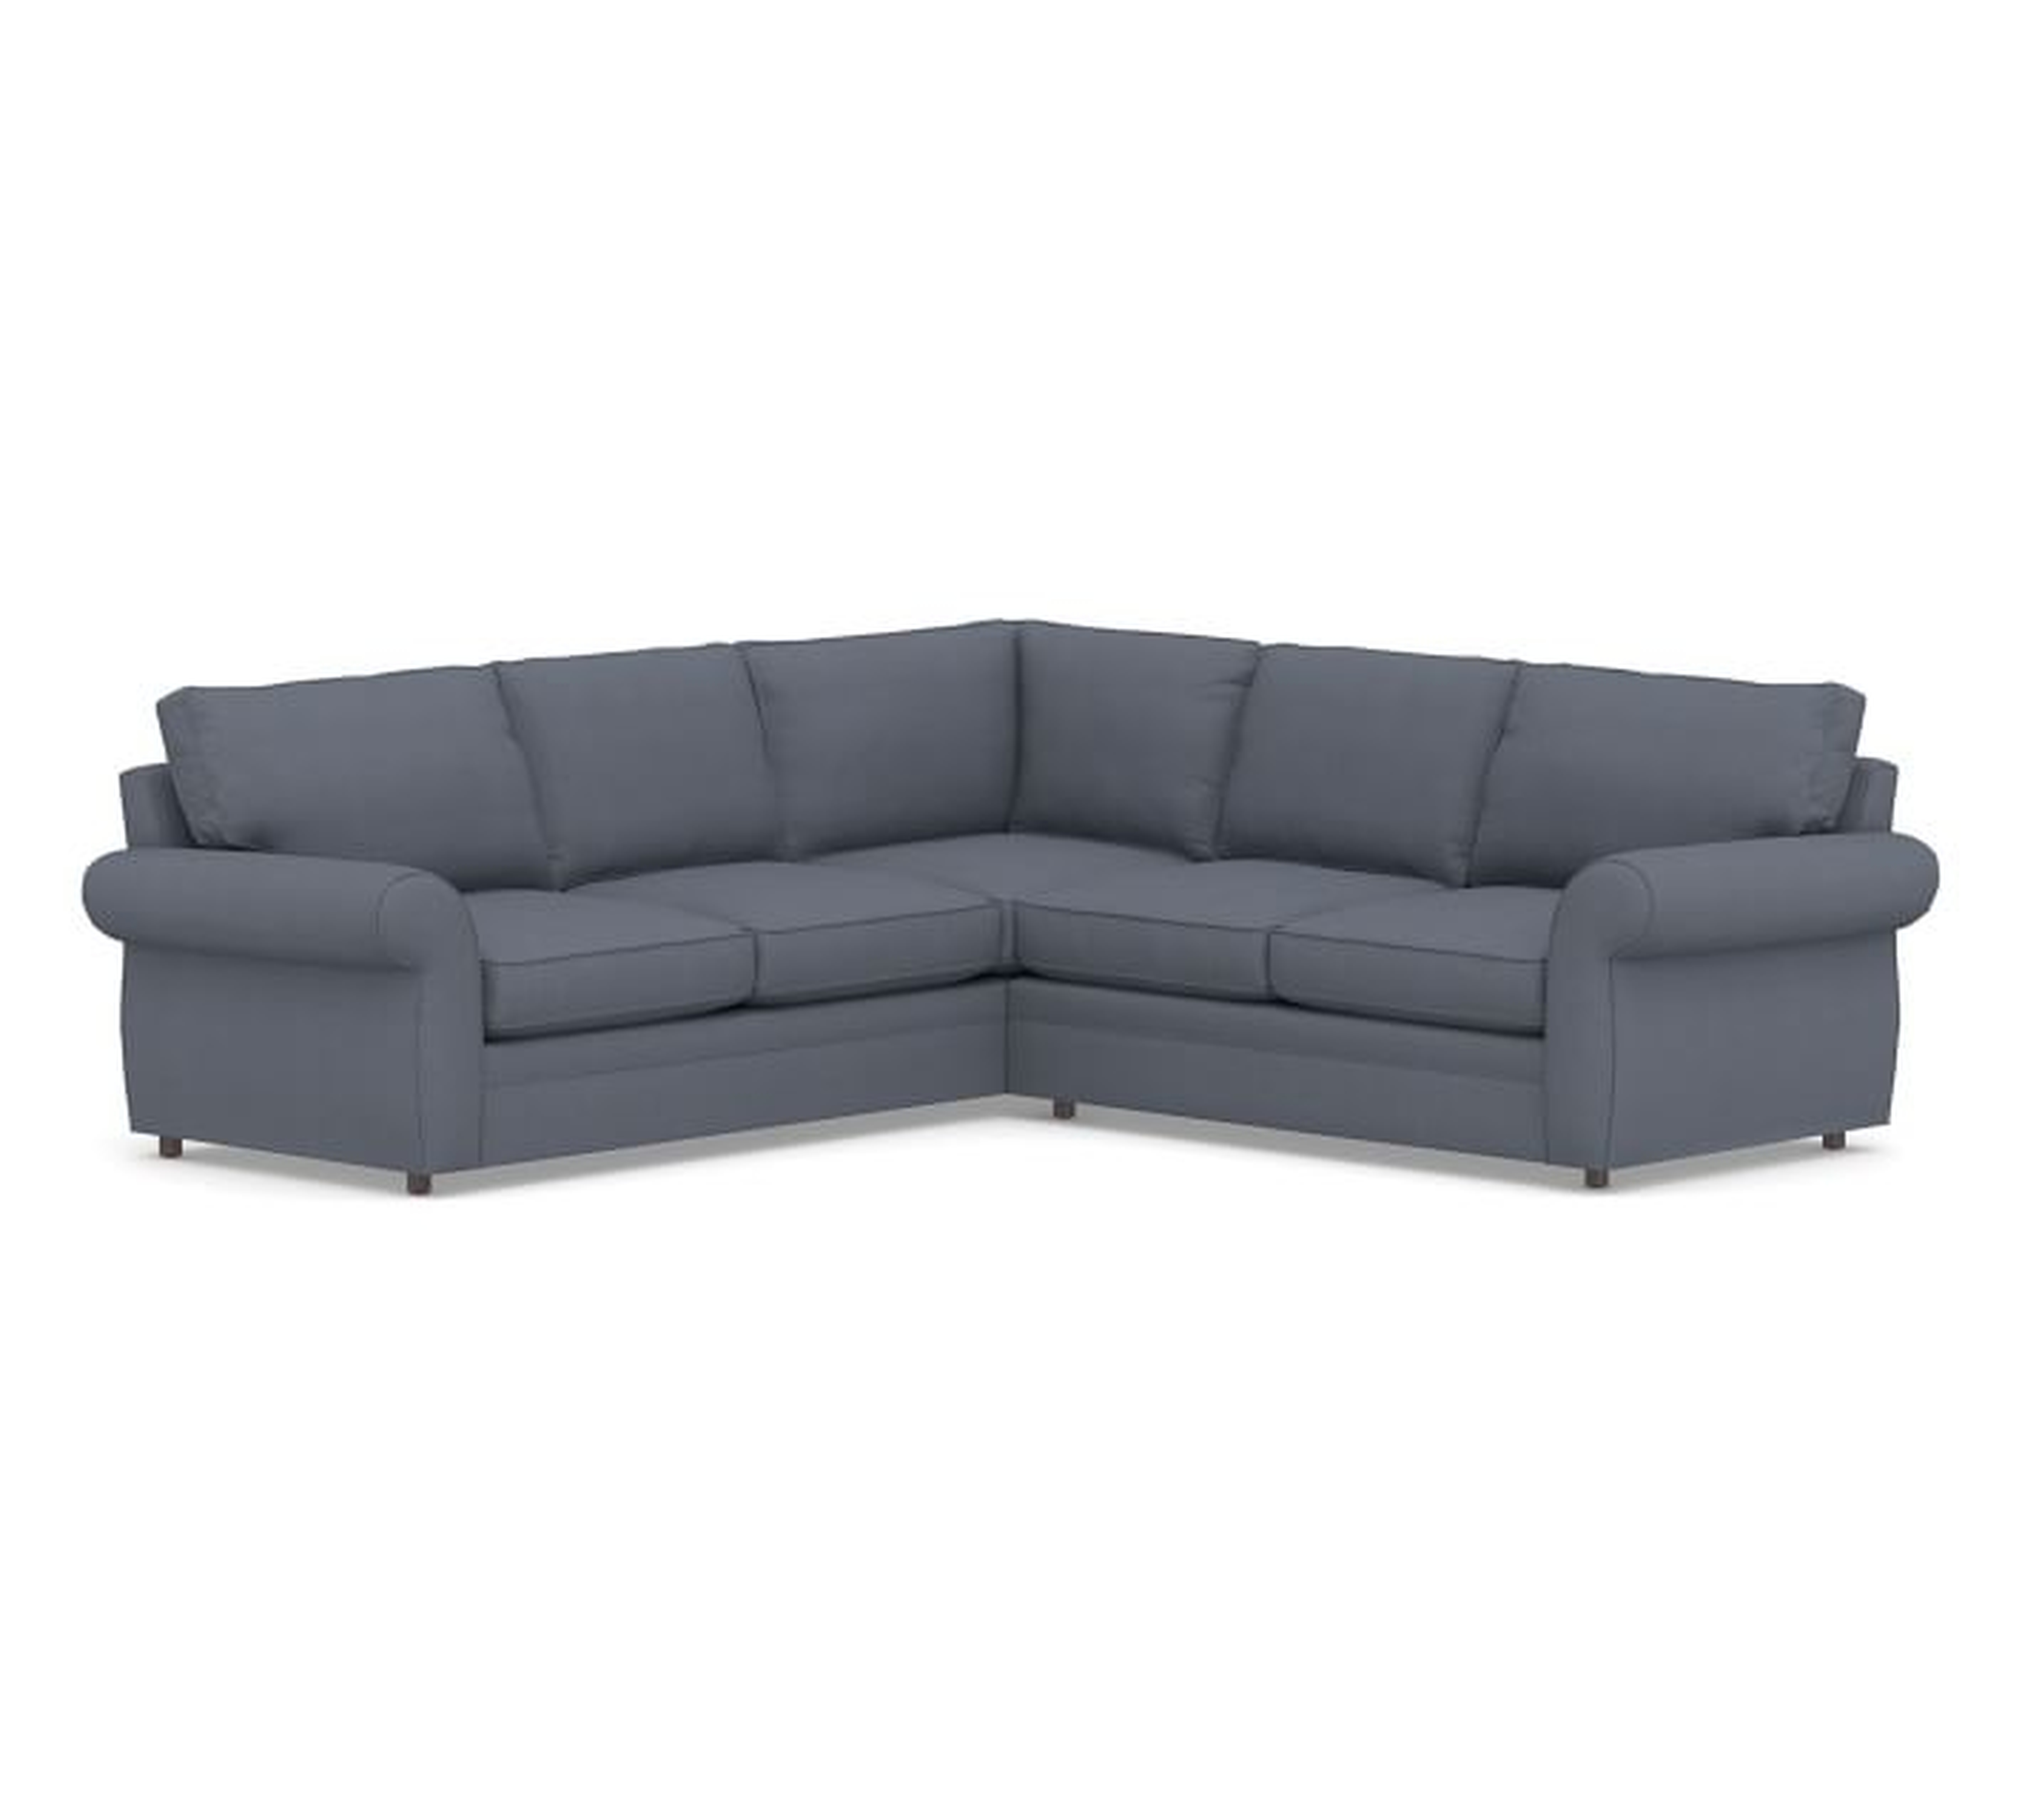 Pearce Roll Arm Upholstered 2-Piece L-Shaped Sectional, Down Blend Wrapped Cushions, Sunbrella(R) Performance Boss Herringbone Indigo - Pottery Barn